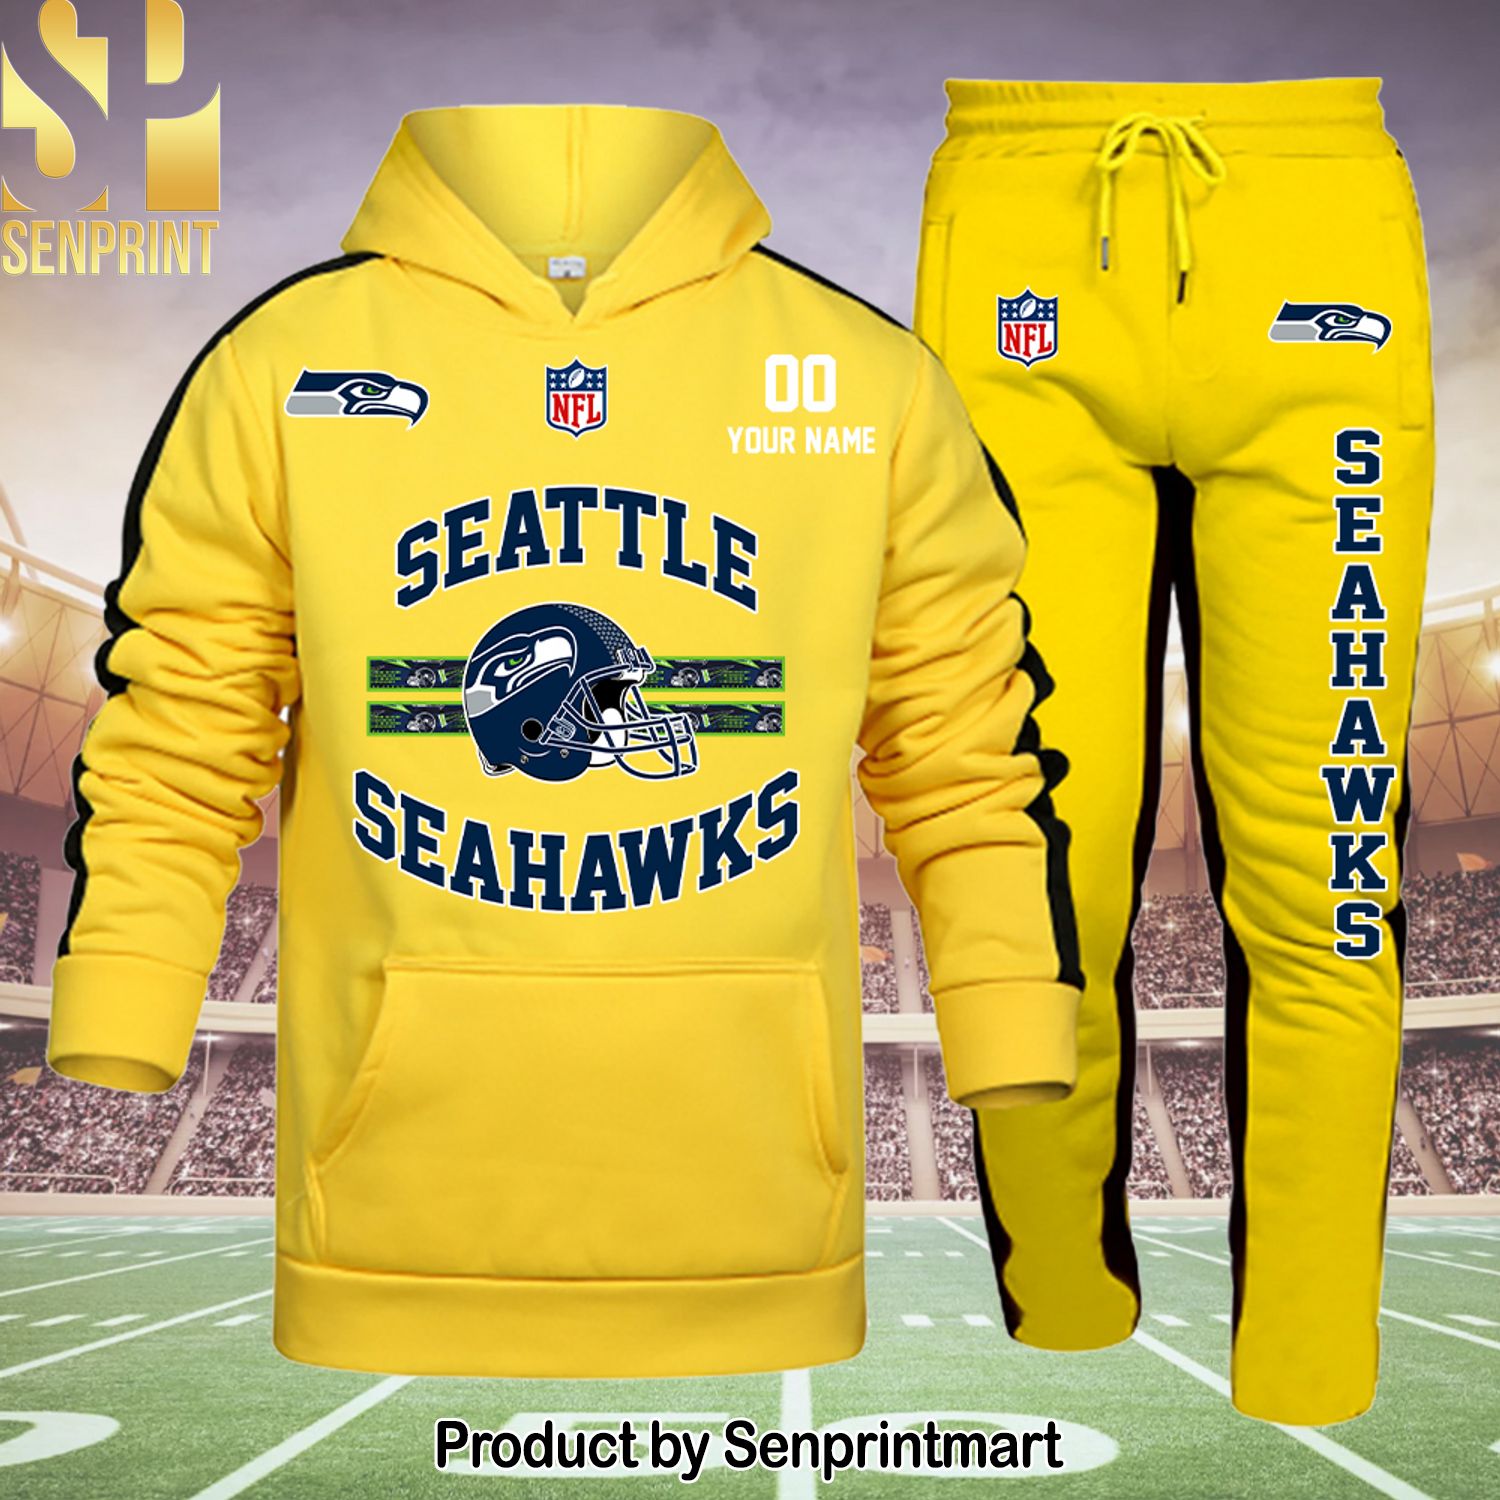 Seattle Seahawks New Version Shirt and Pants